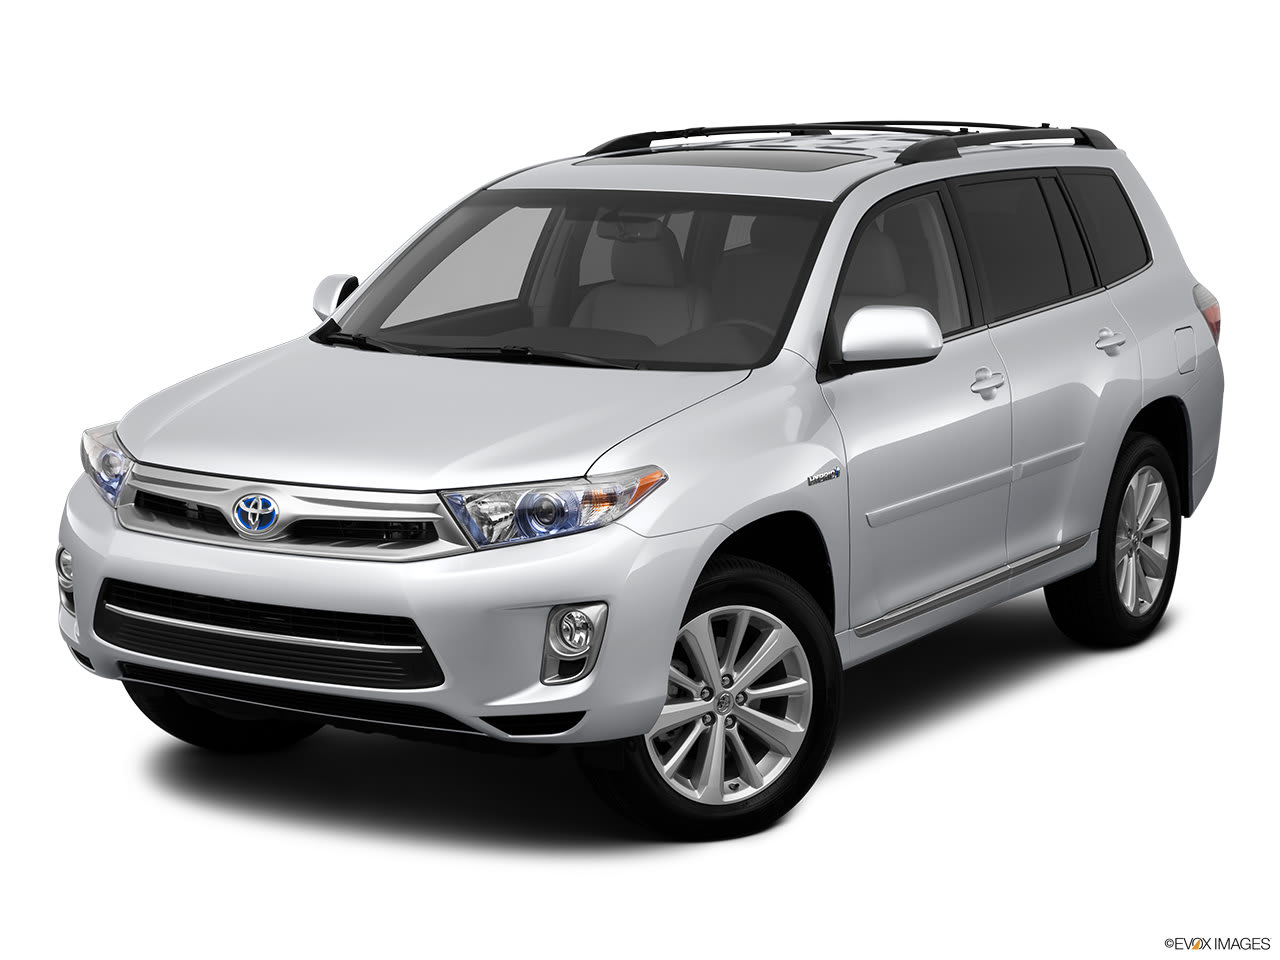 2012 Toyota Highlander Research, photos, specs, and expertise